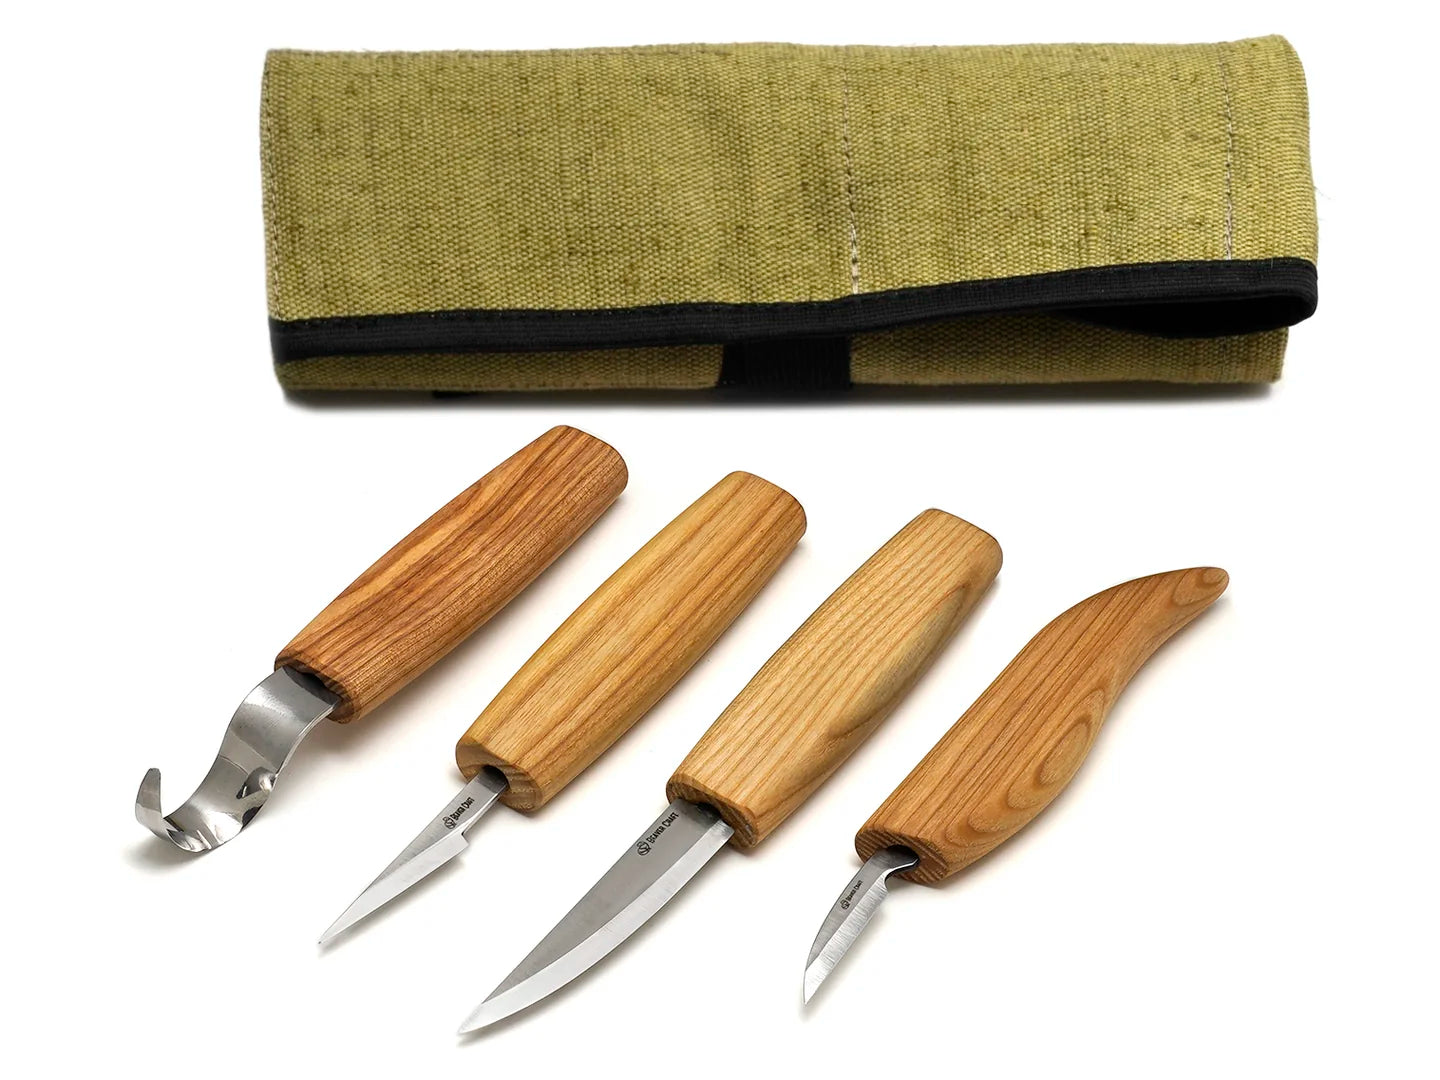 Spoon Carving Tools Wood Carving Tools Set 4 Tools in a Roll